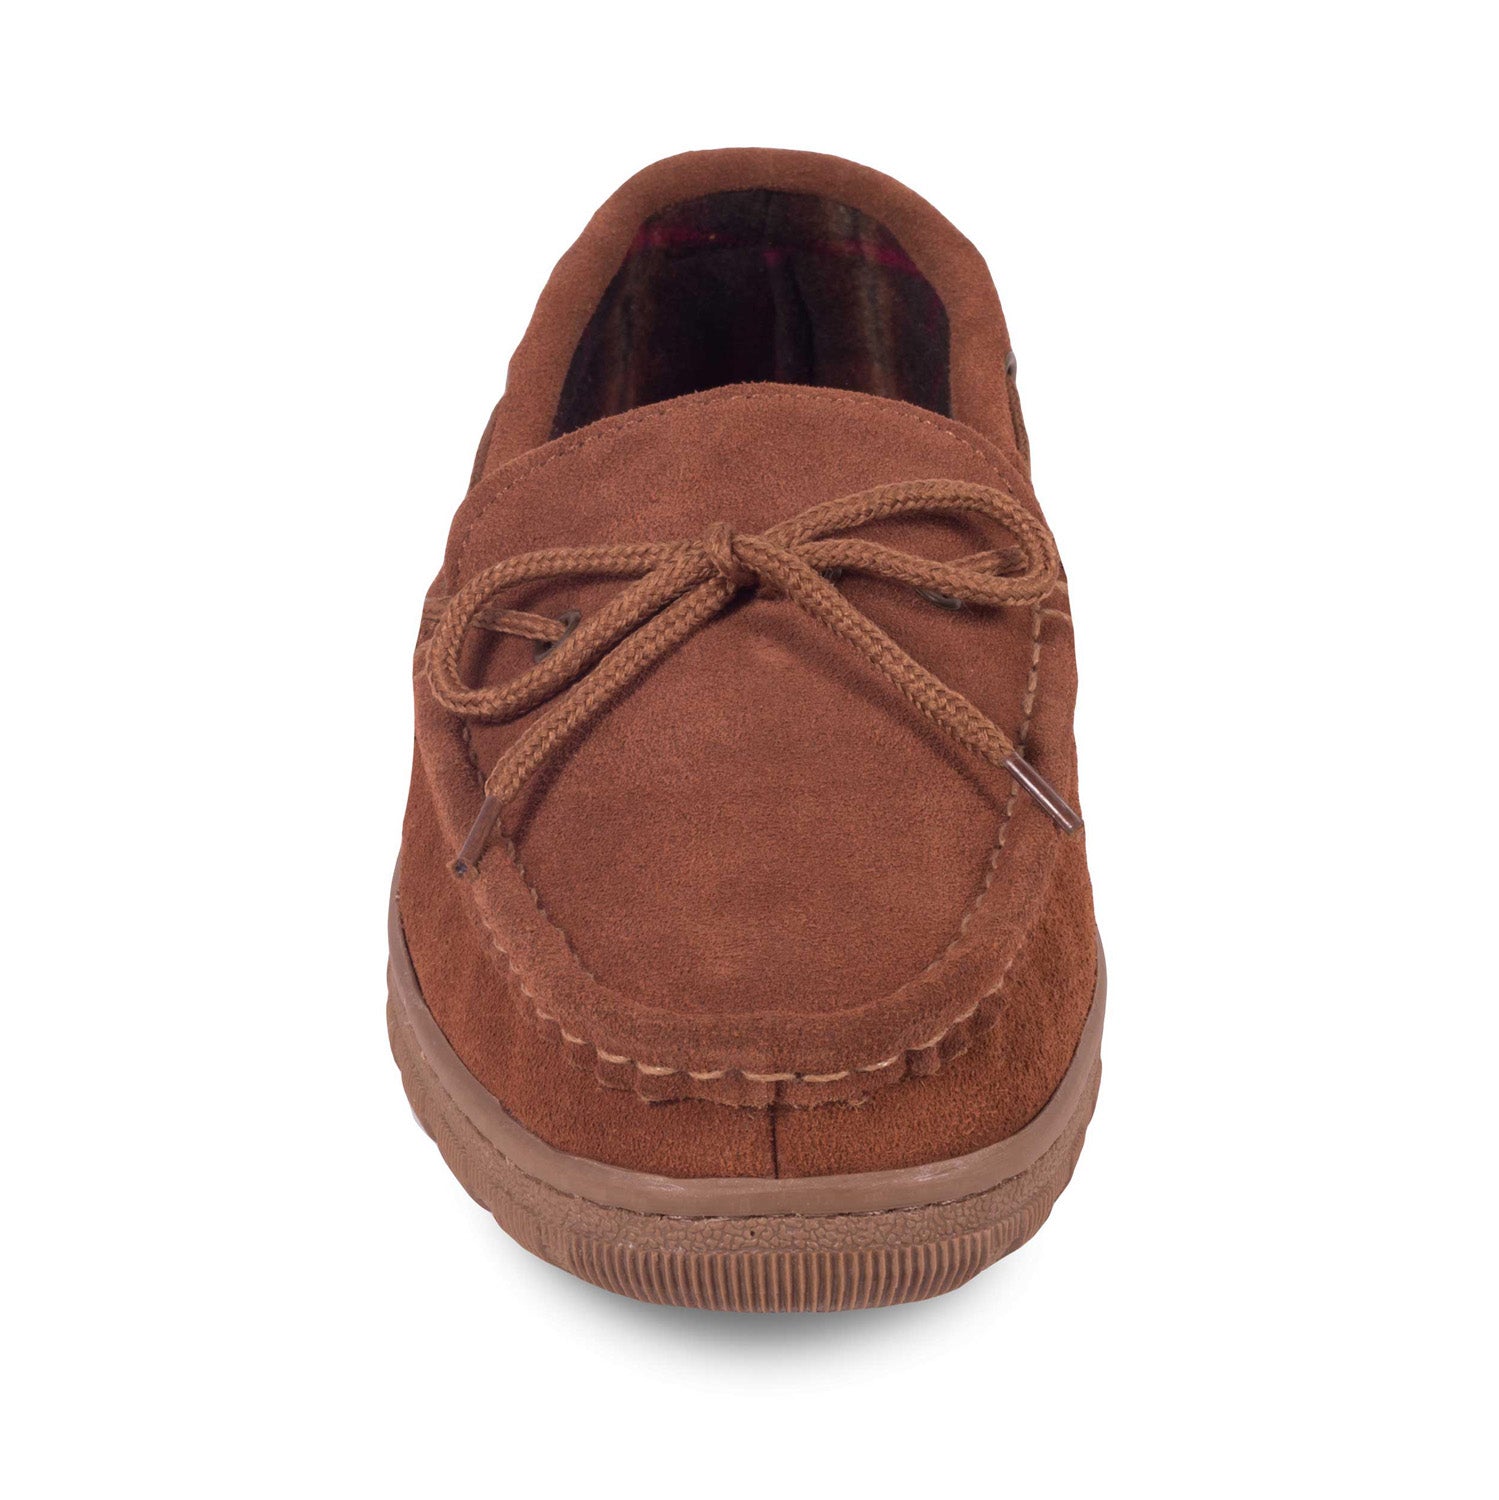 unlined moccasins